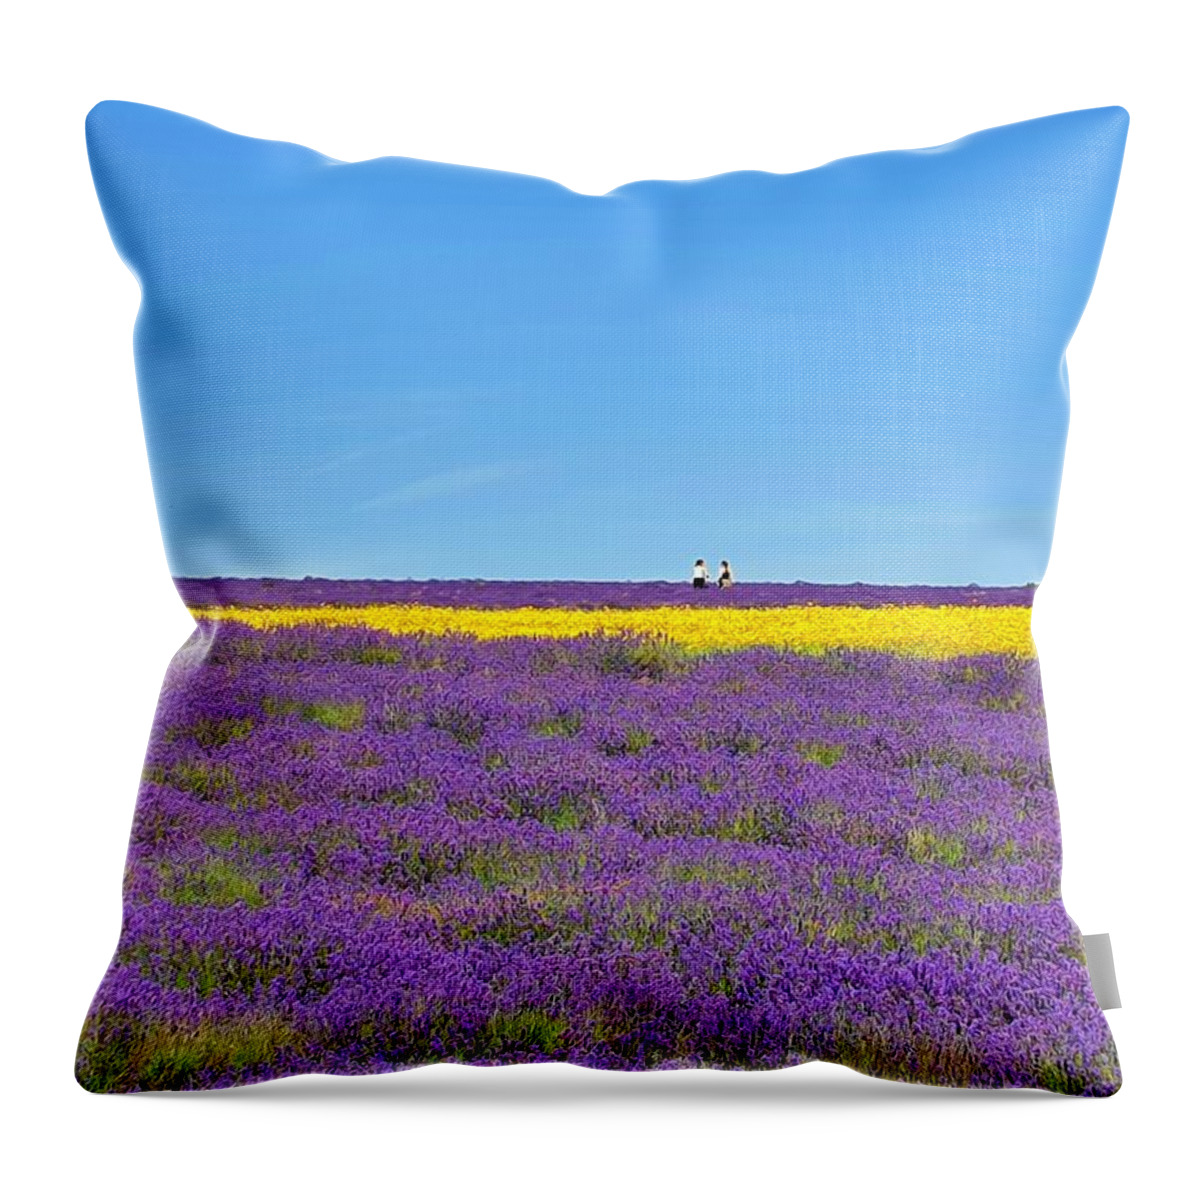 Wildflowers Throw Pillow featuring the photograph Lavender Heaven by Andrea Whitaker